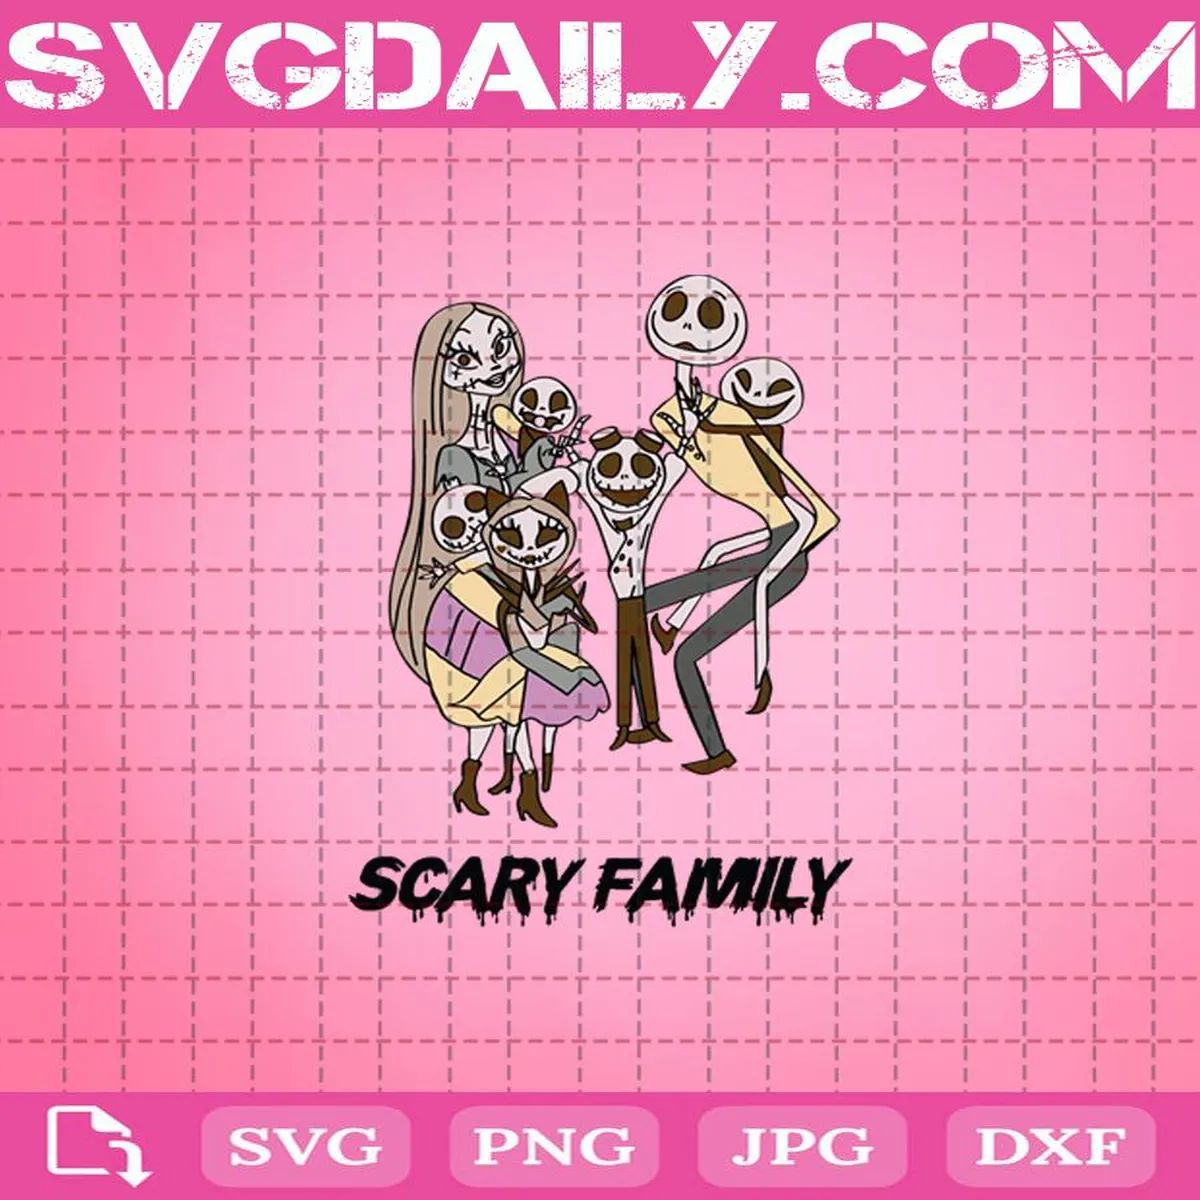 Jack Skellington And Sally Family Svg, Scary Family Svg, The Nightmare Before Christmas Svg, Family Svg